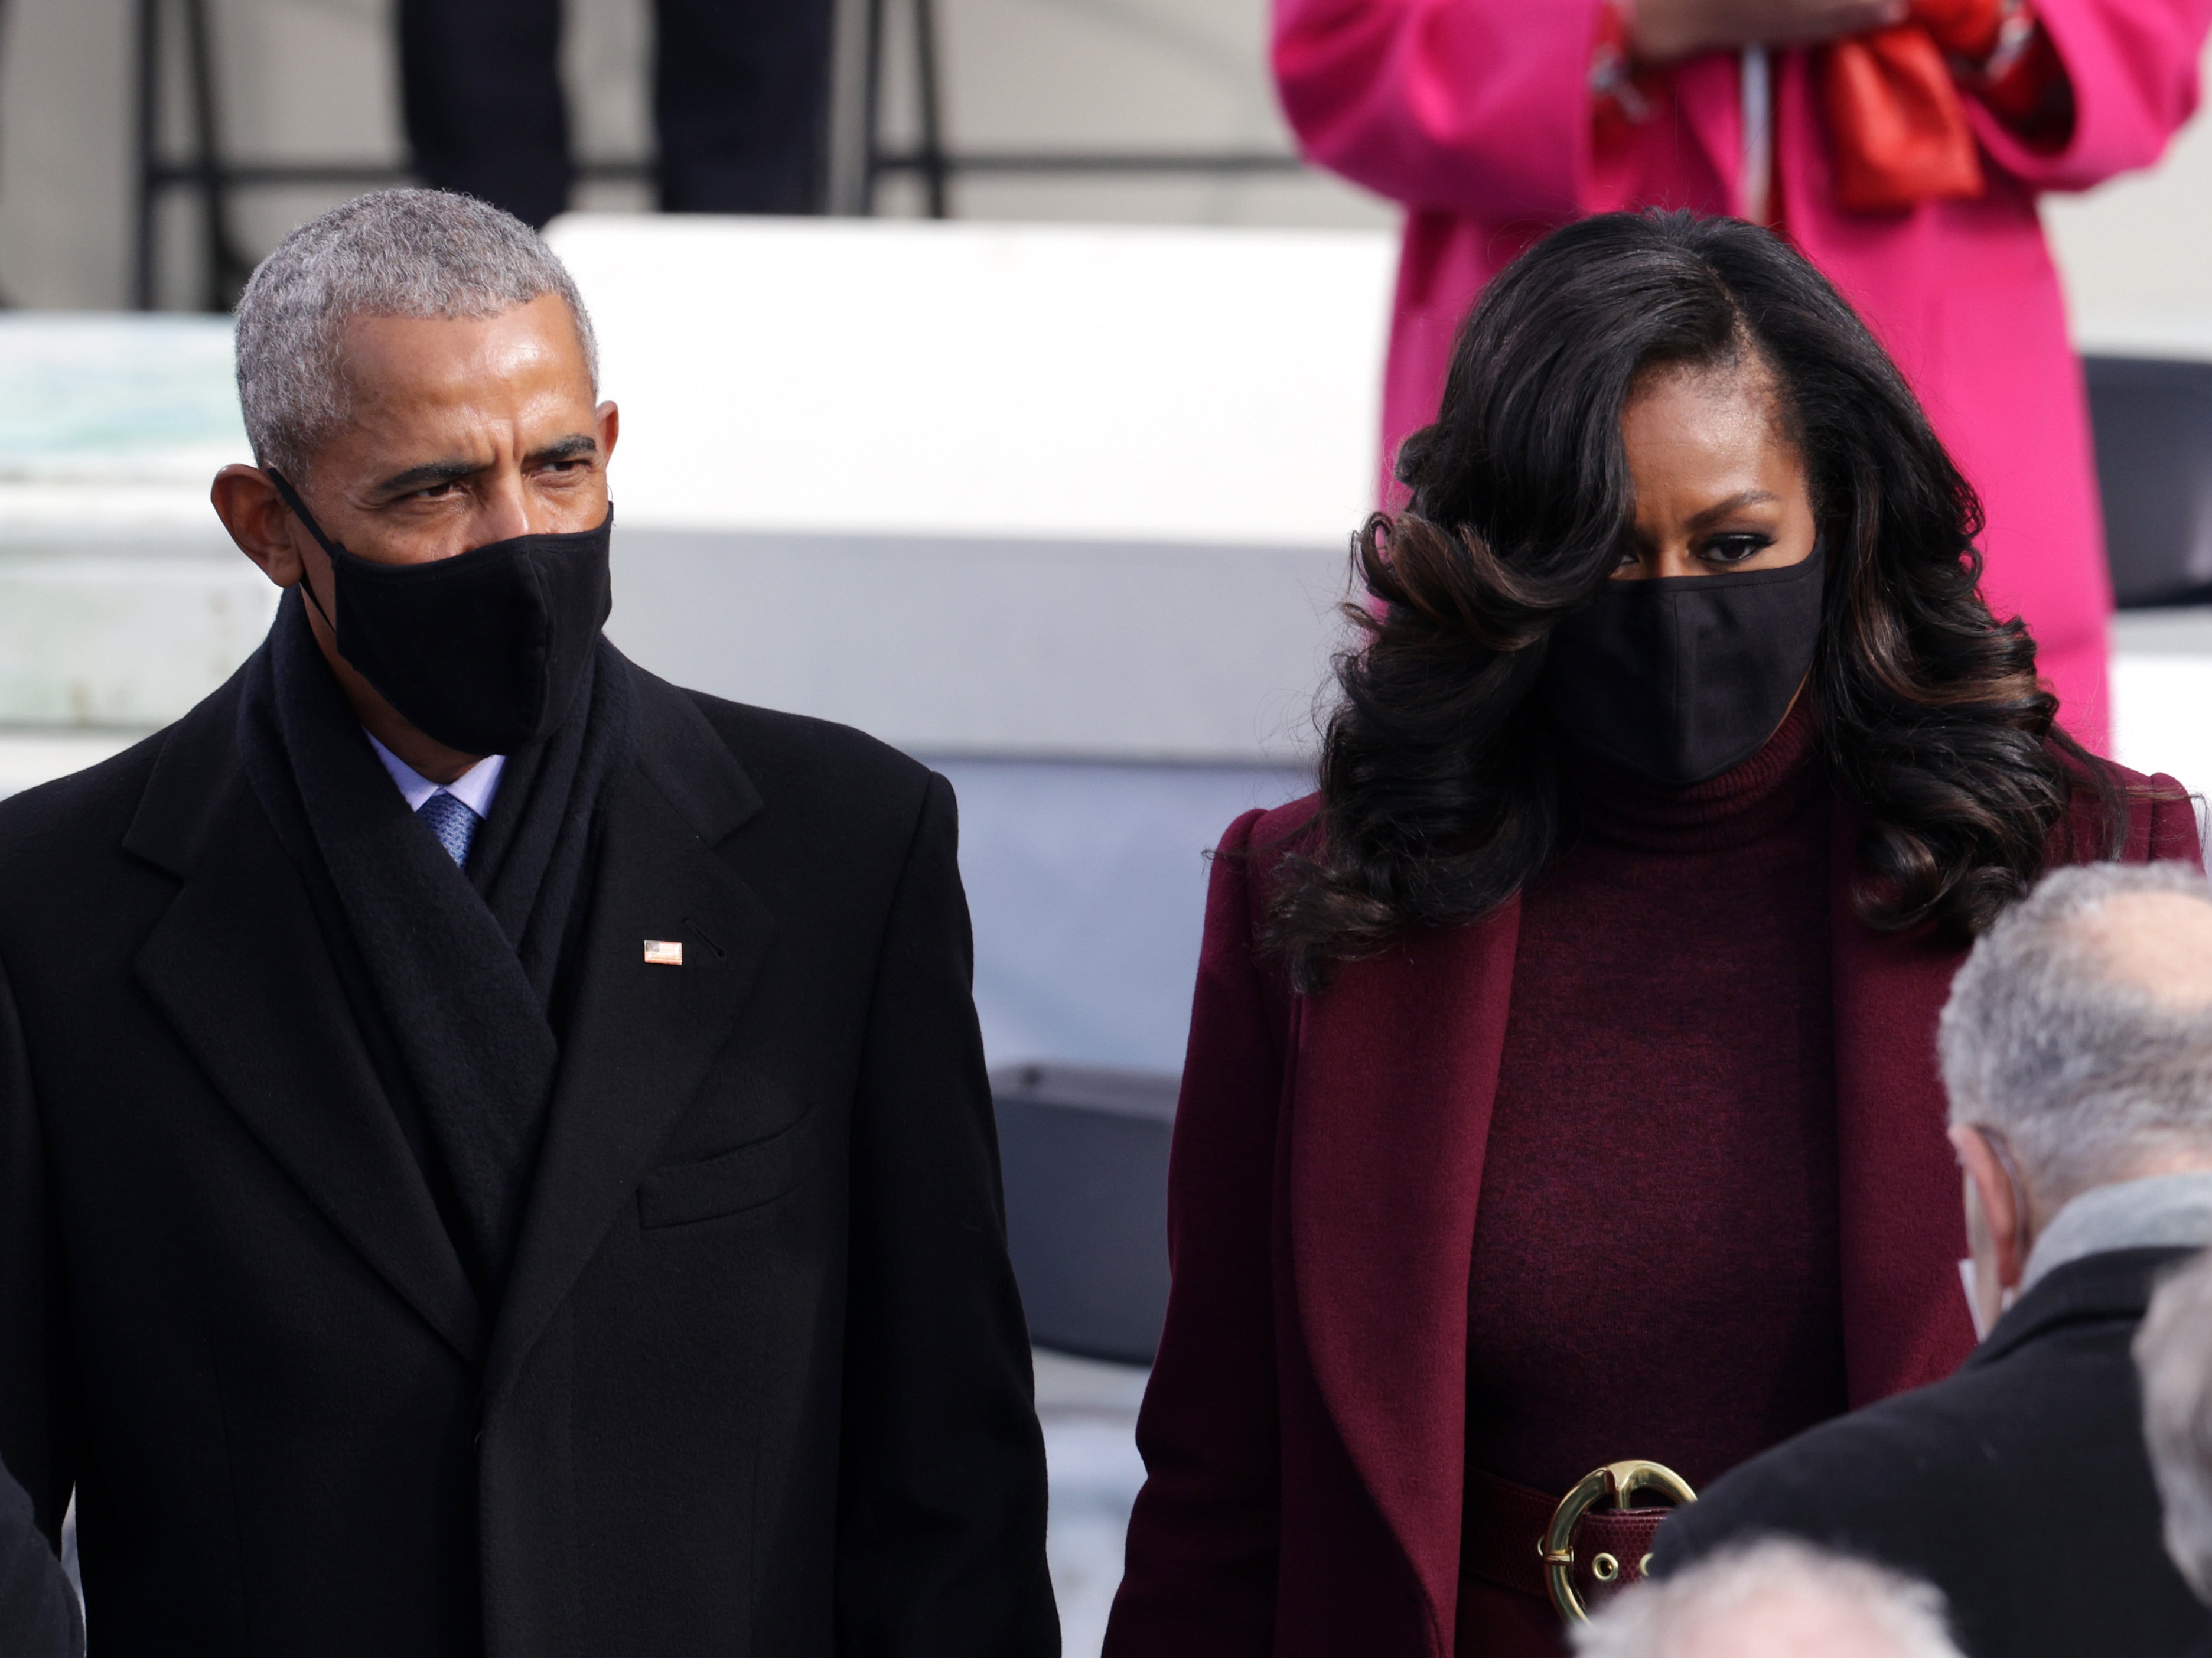 Former President Barack Obama and former First Lady Michelle Obama arrive at the inauguration of Joe Biden as the 46th President of the United States on the West Front of the Capitol